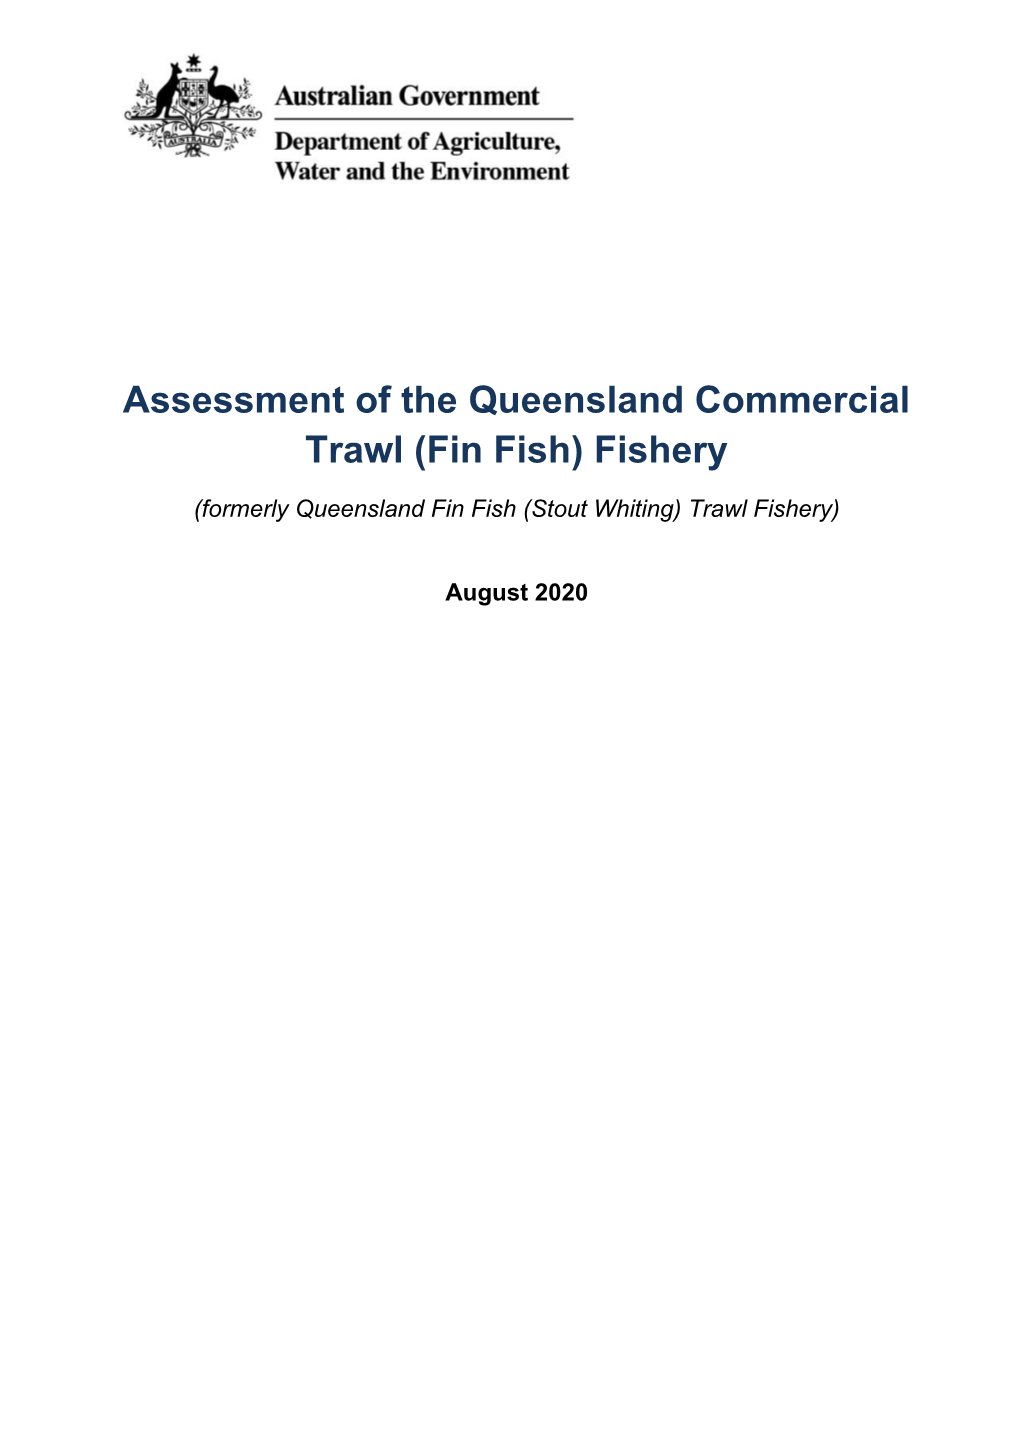 Assessment of the Queensland Commercial Trawl (Fin Fish) Fishery